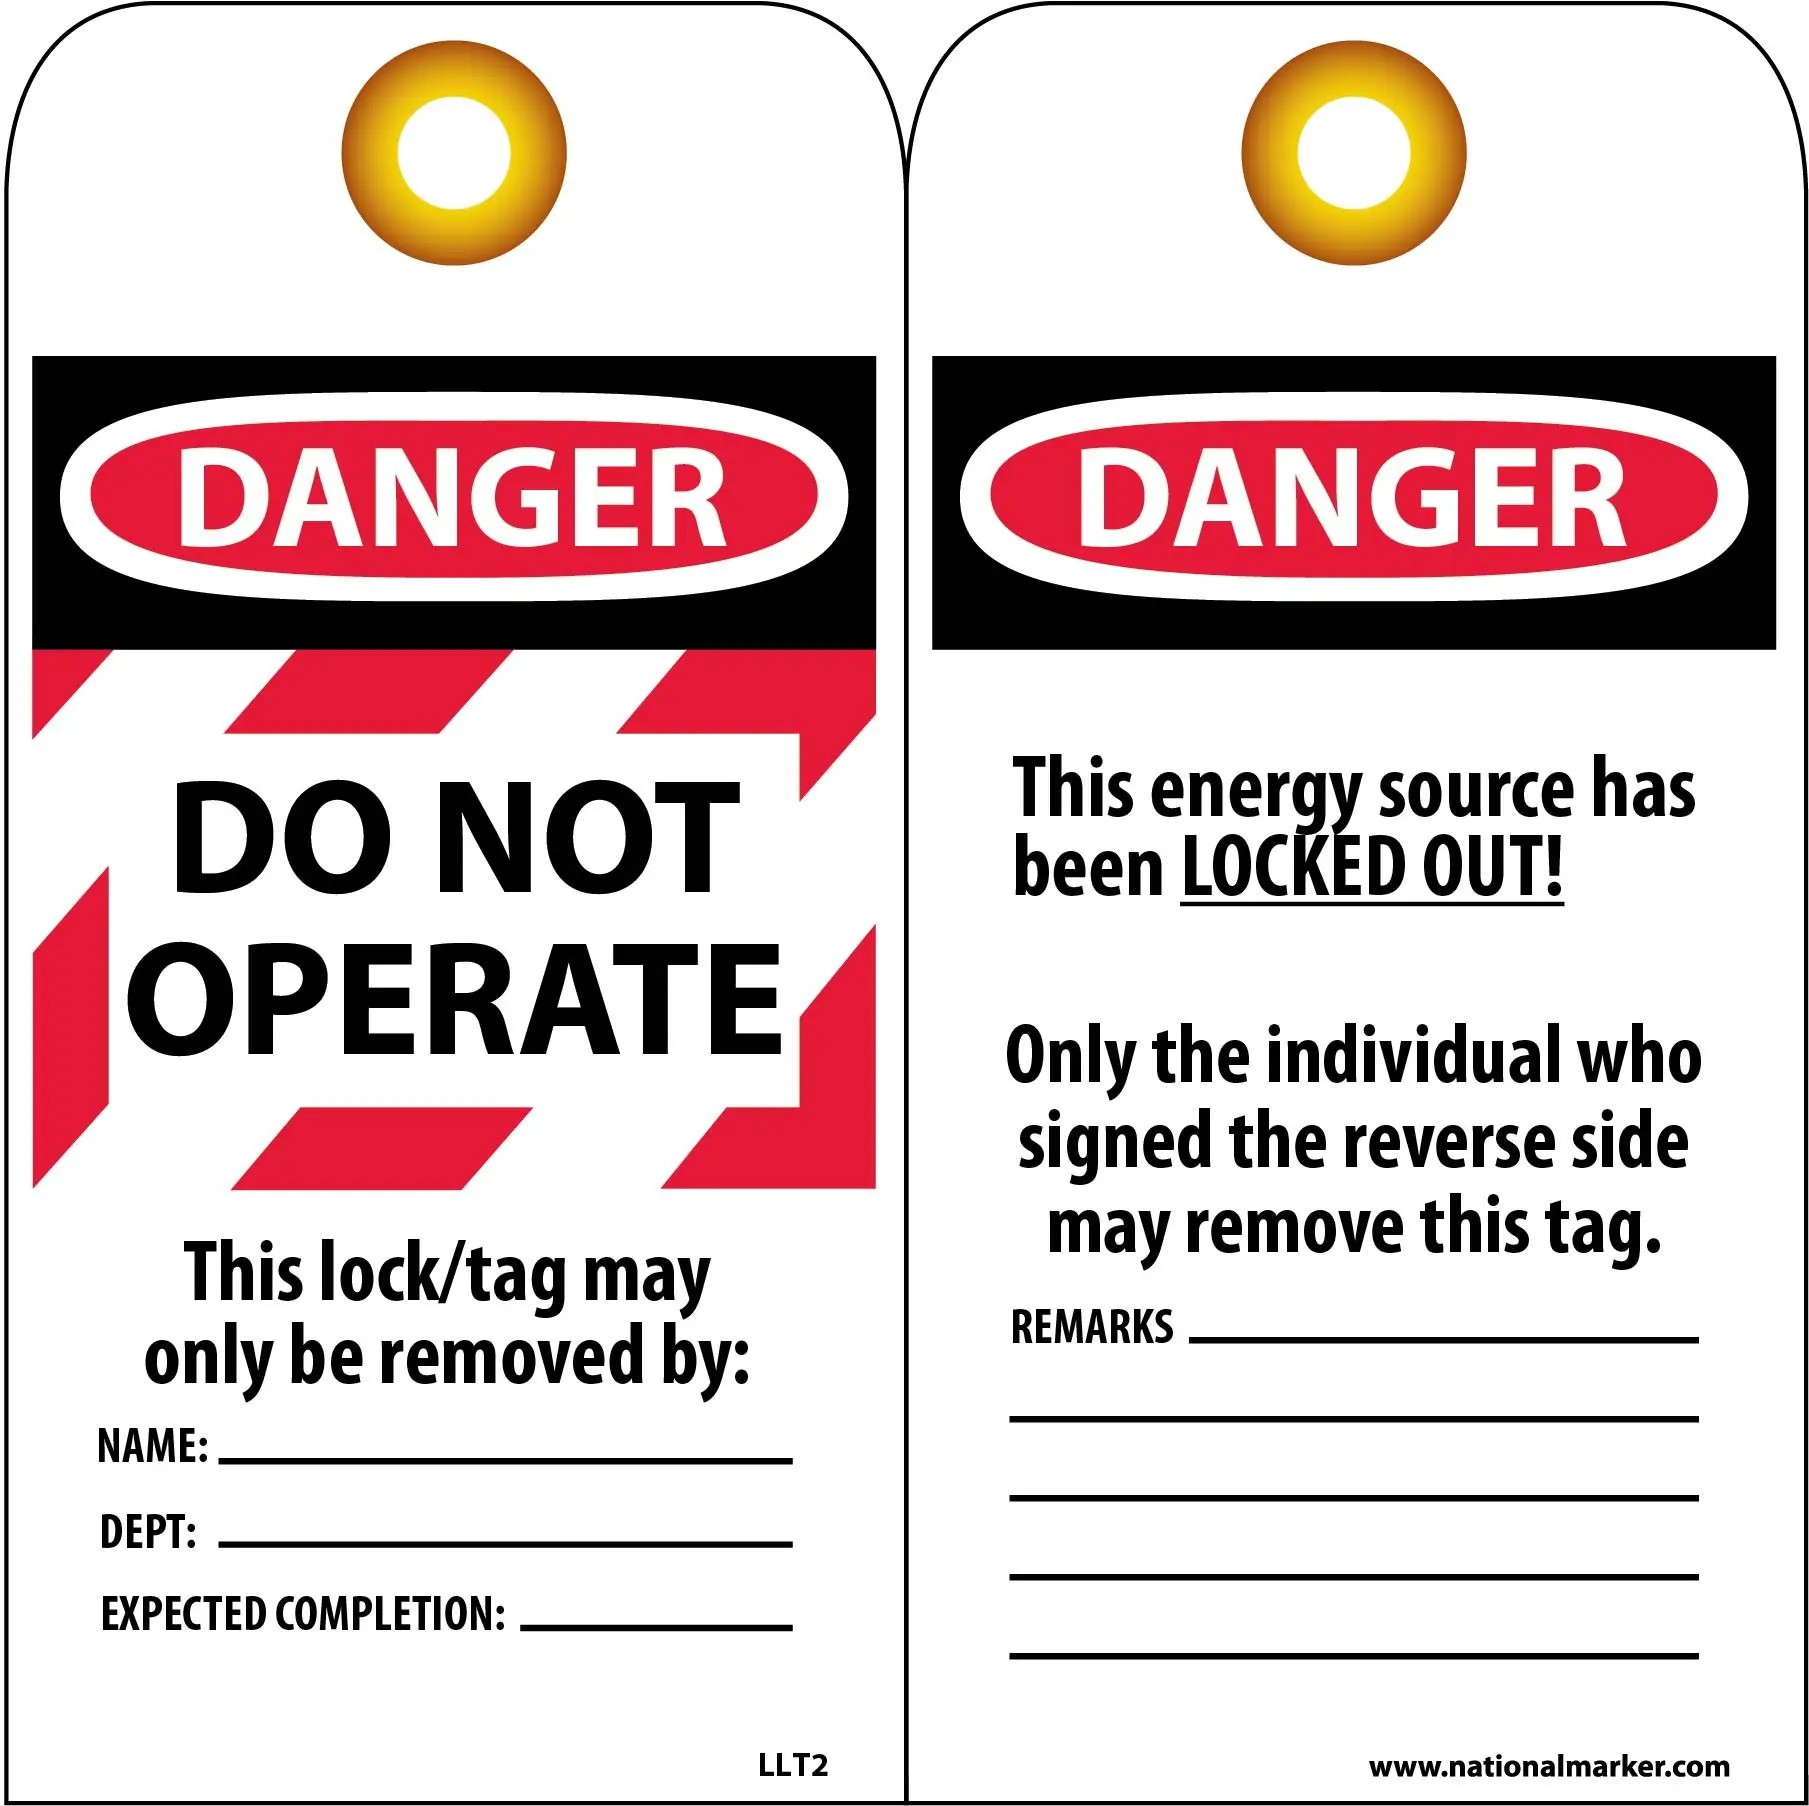 NMC RPT3DANGER Pack of 25 DO NOT OPERATE ELECTRICIANS AT WORK Accident Prevention Tag Black/Red on White Red 6 Height Unrippable Vinyl 3 Length 6 Height 3 Length